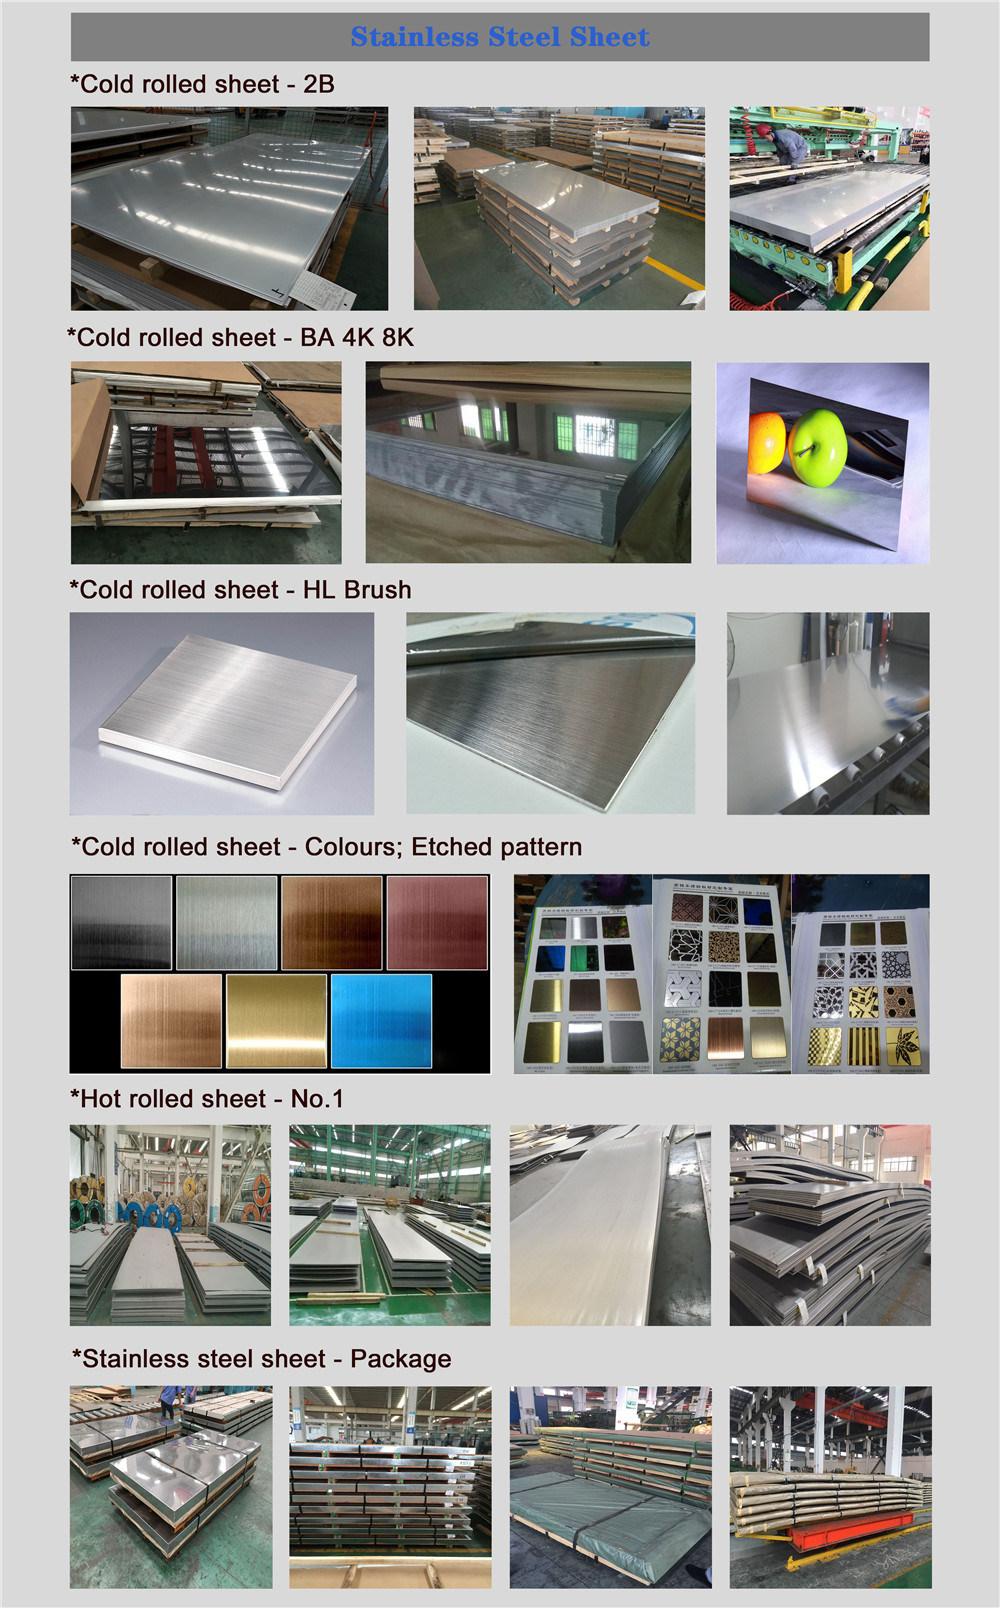 Good Price Hot Rolled SUS 304 Stainless Steel Plate No. 1 Finish 316 Stainless Steel Sheet